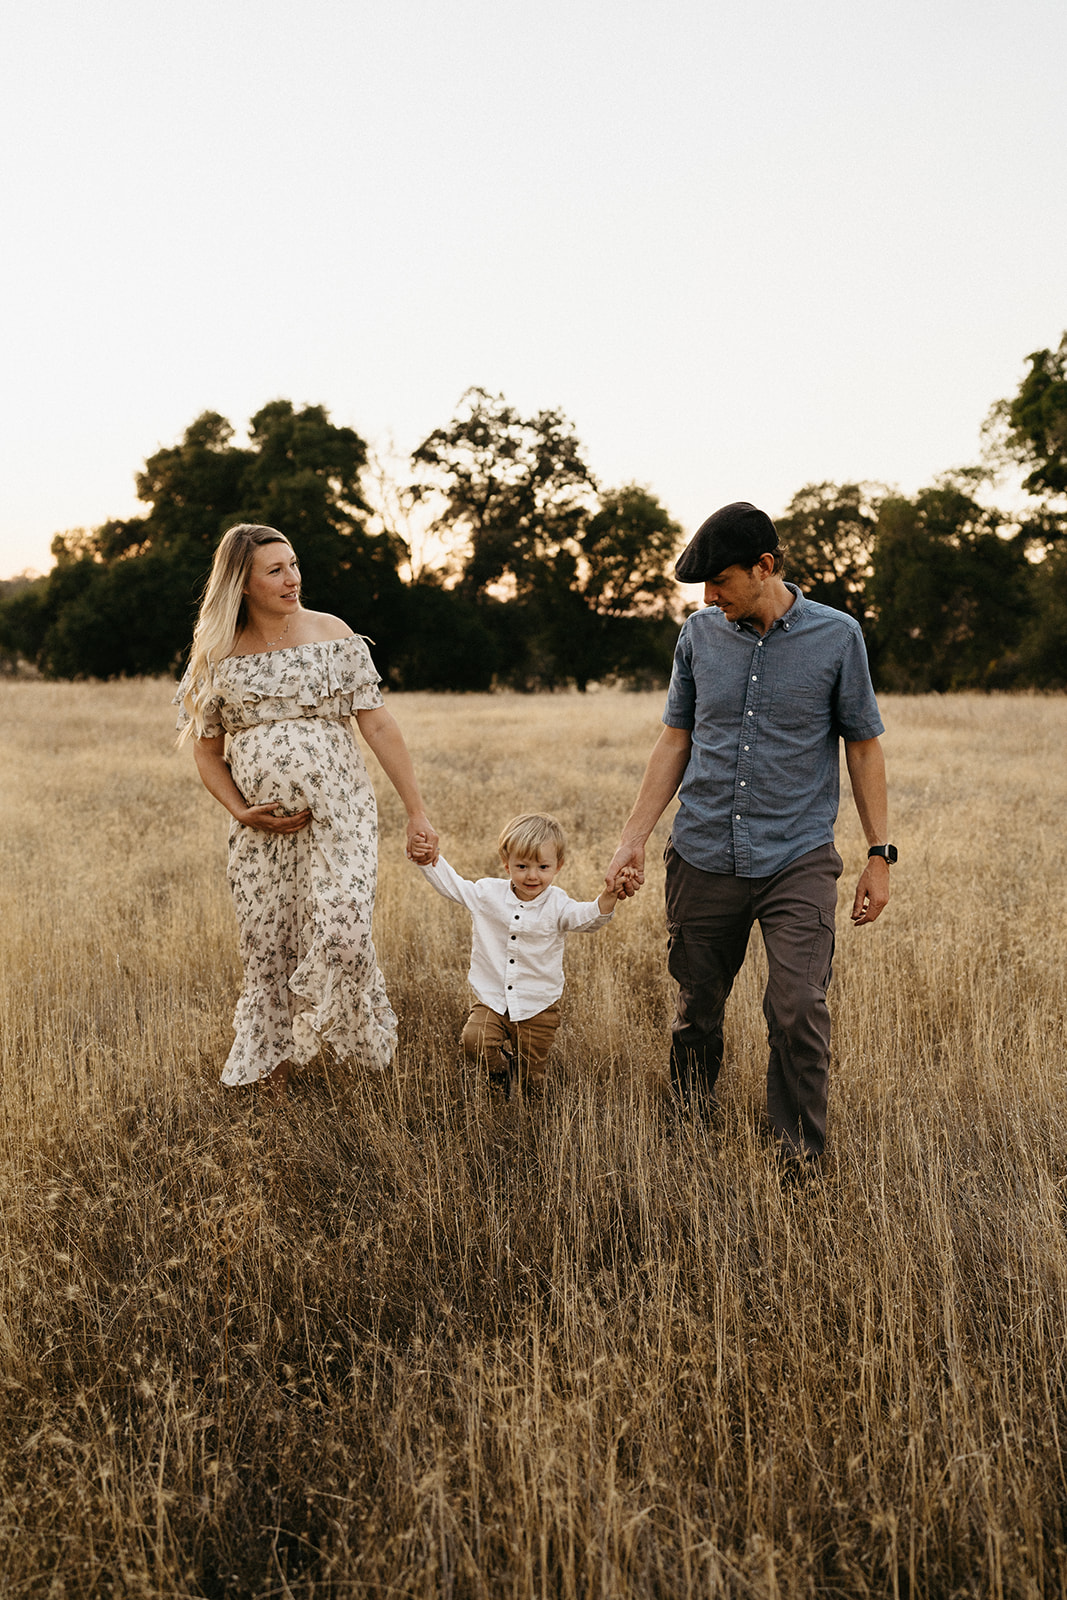 A family of three - soon to be four - walking in a field during golden hour.